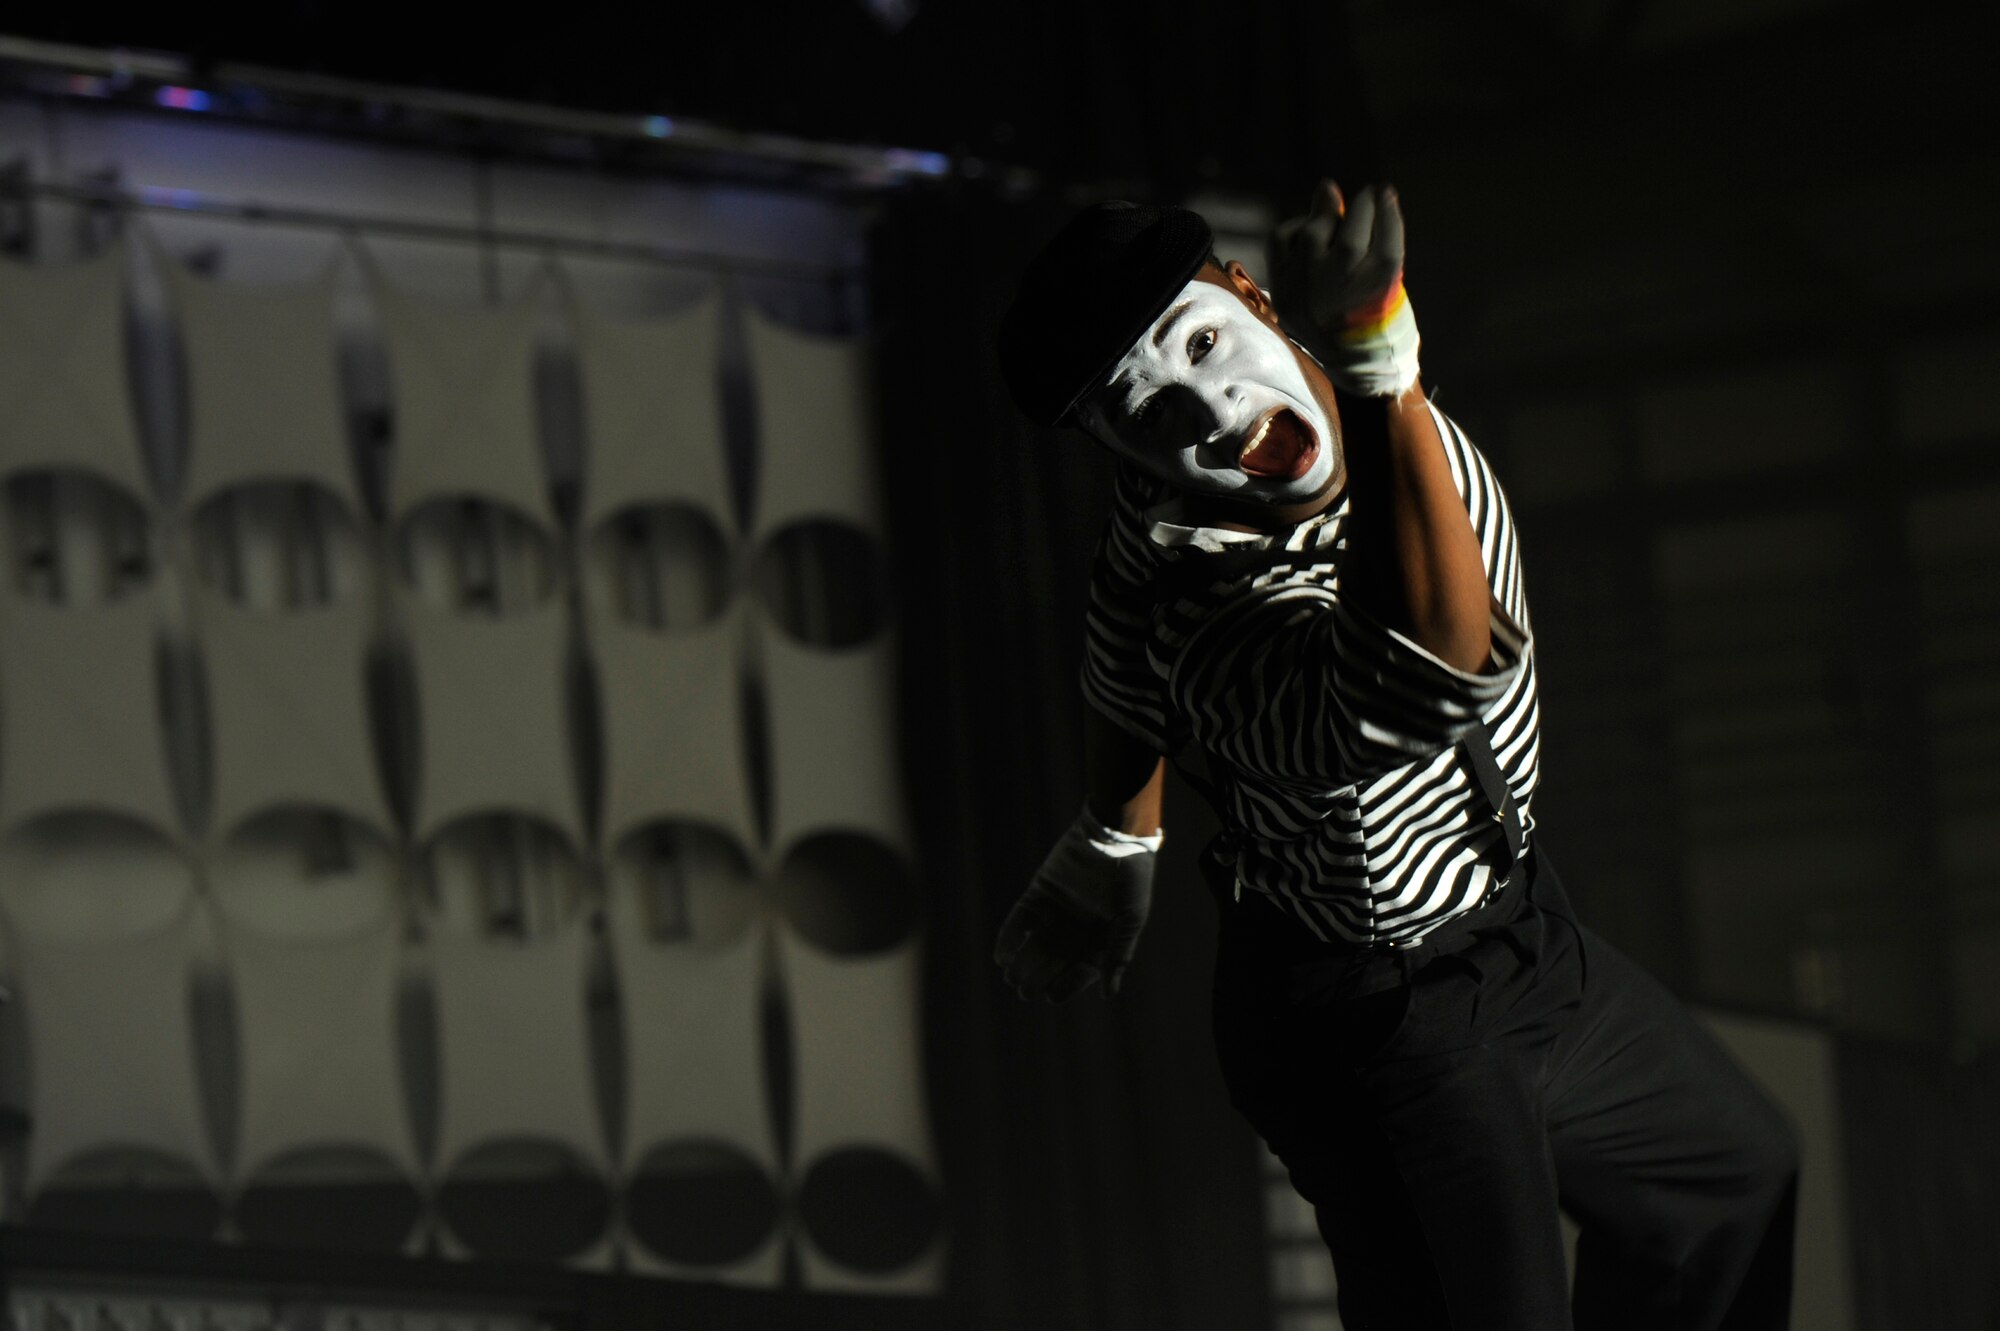 Airman 1st Class Jonathan Leak plays a mime during a skit while on tour with Tops in Blue at Ramstein Air Base, Germany, Oct. 21, 2012. The Tops in Blue 2012 World Tour, entitled “Listen,” has traveled across the United States and over 20 different countries. (U.S. Air Force photo/ Senior Airman Aaron-Forrest Wainwright)